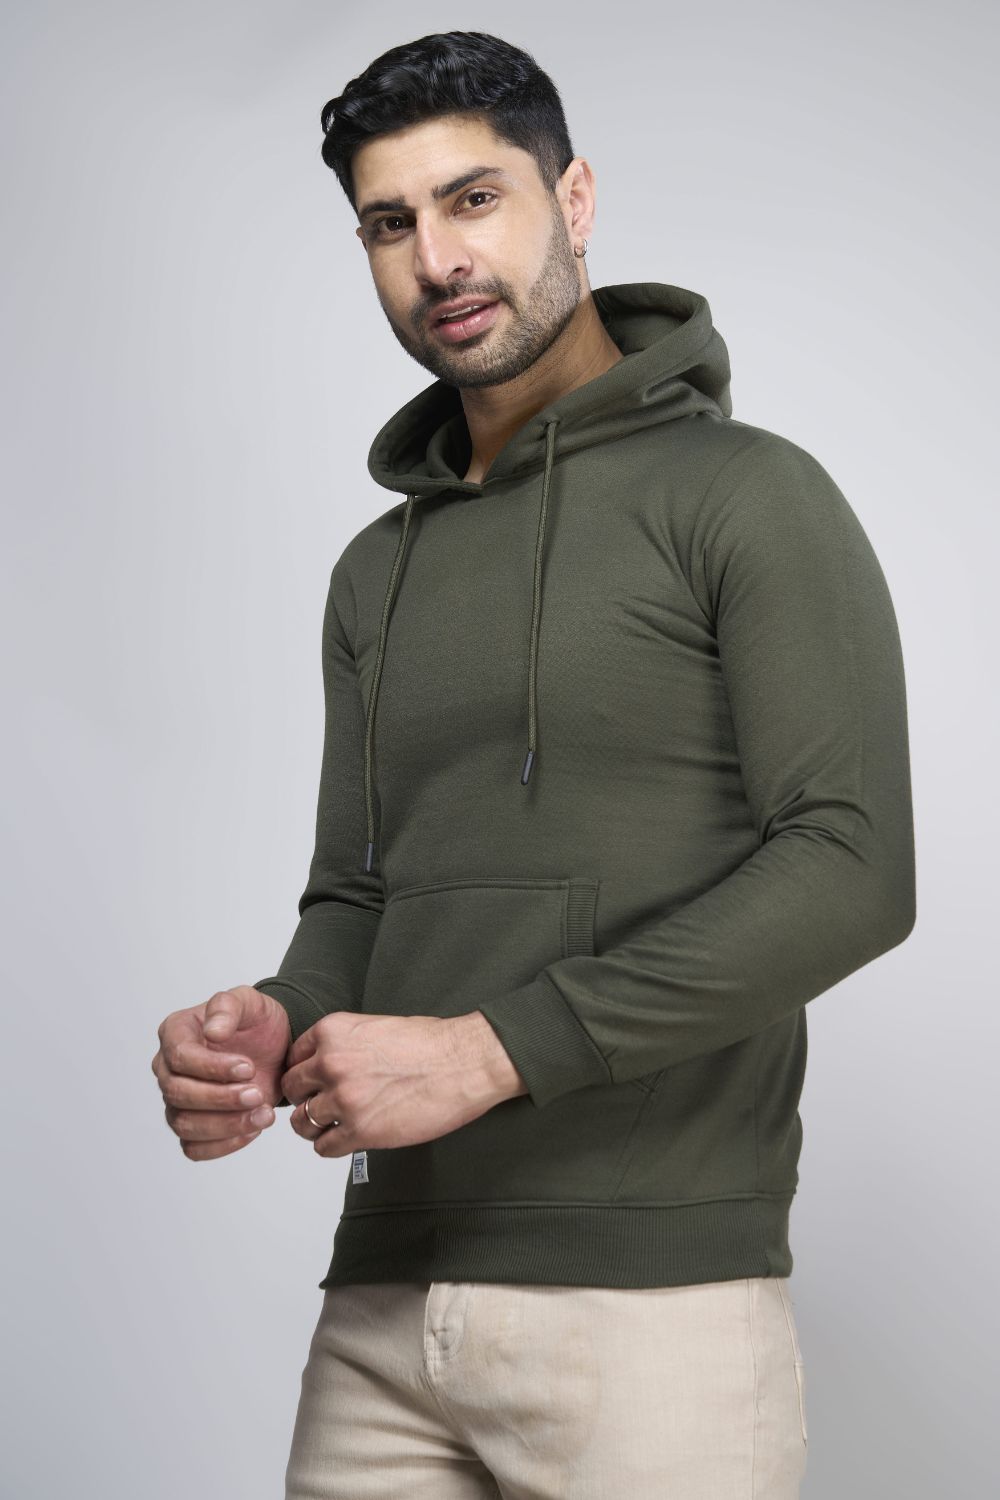 Olive colored, hoodie for men with full sleeves and relaxed fit, side view.